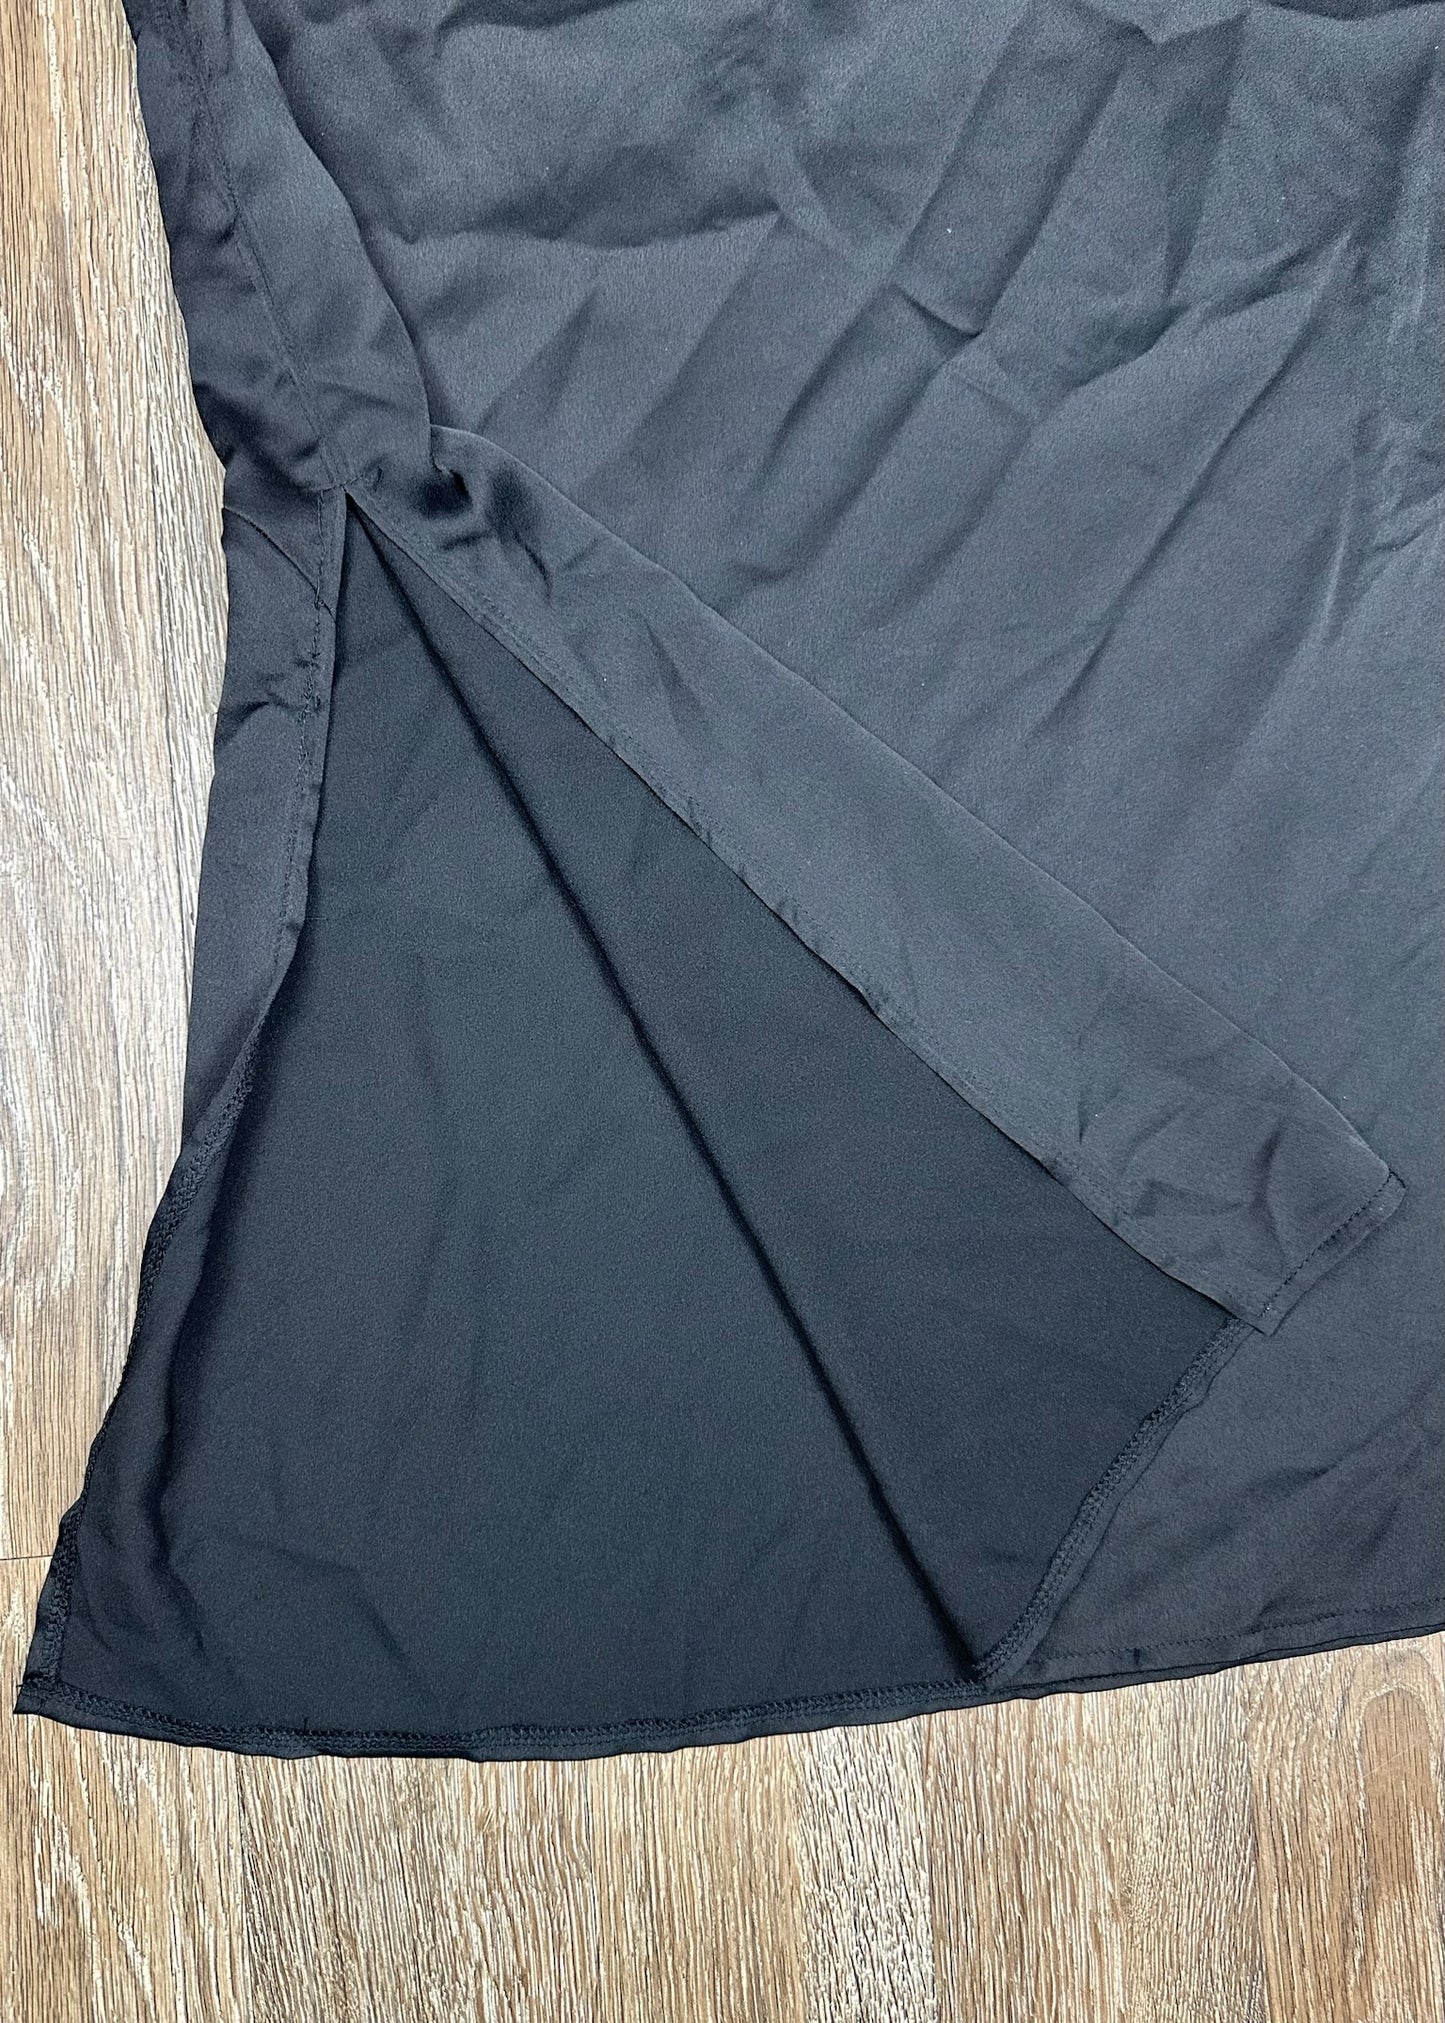 Black Satin Skirt by Misguided